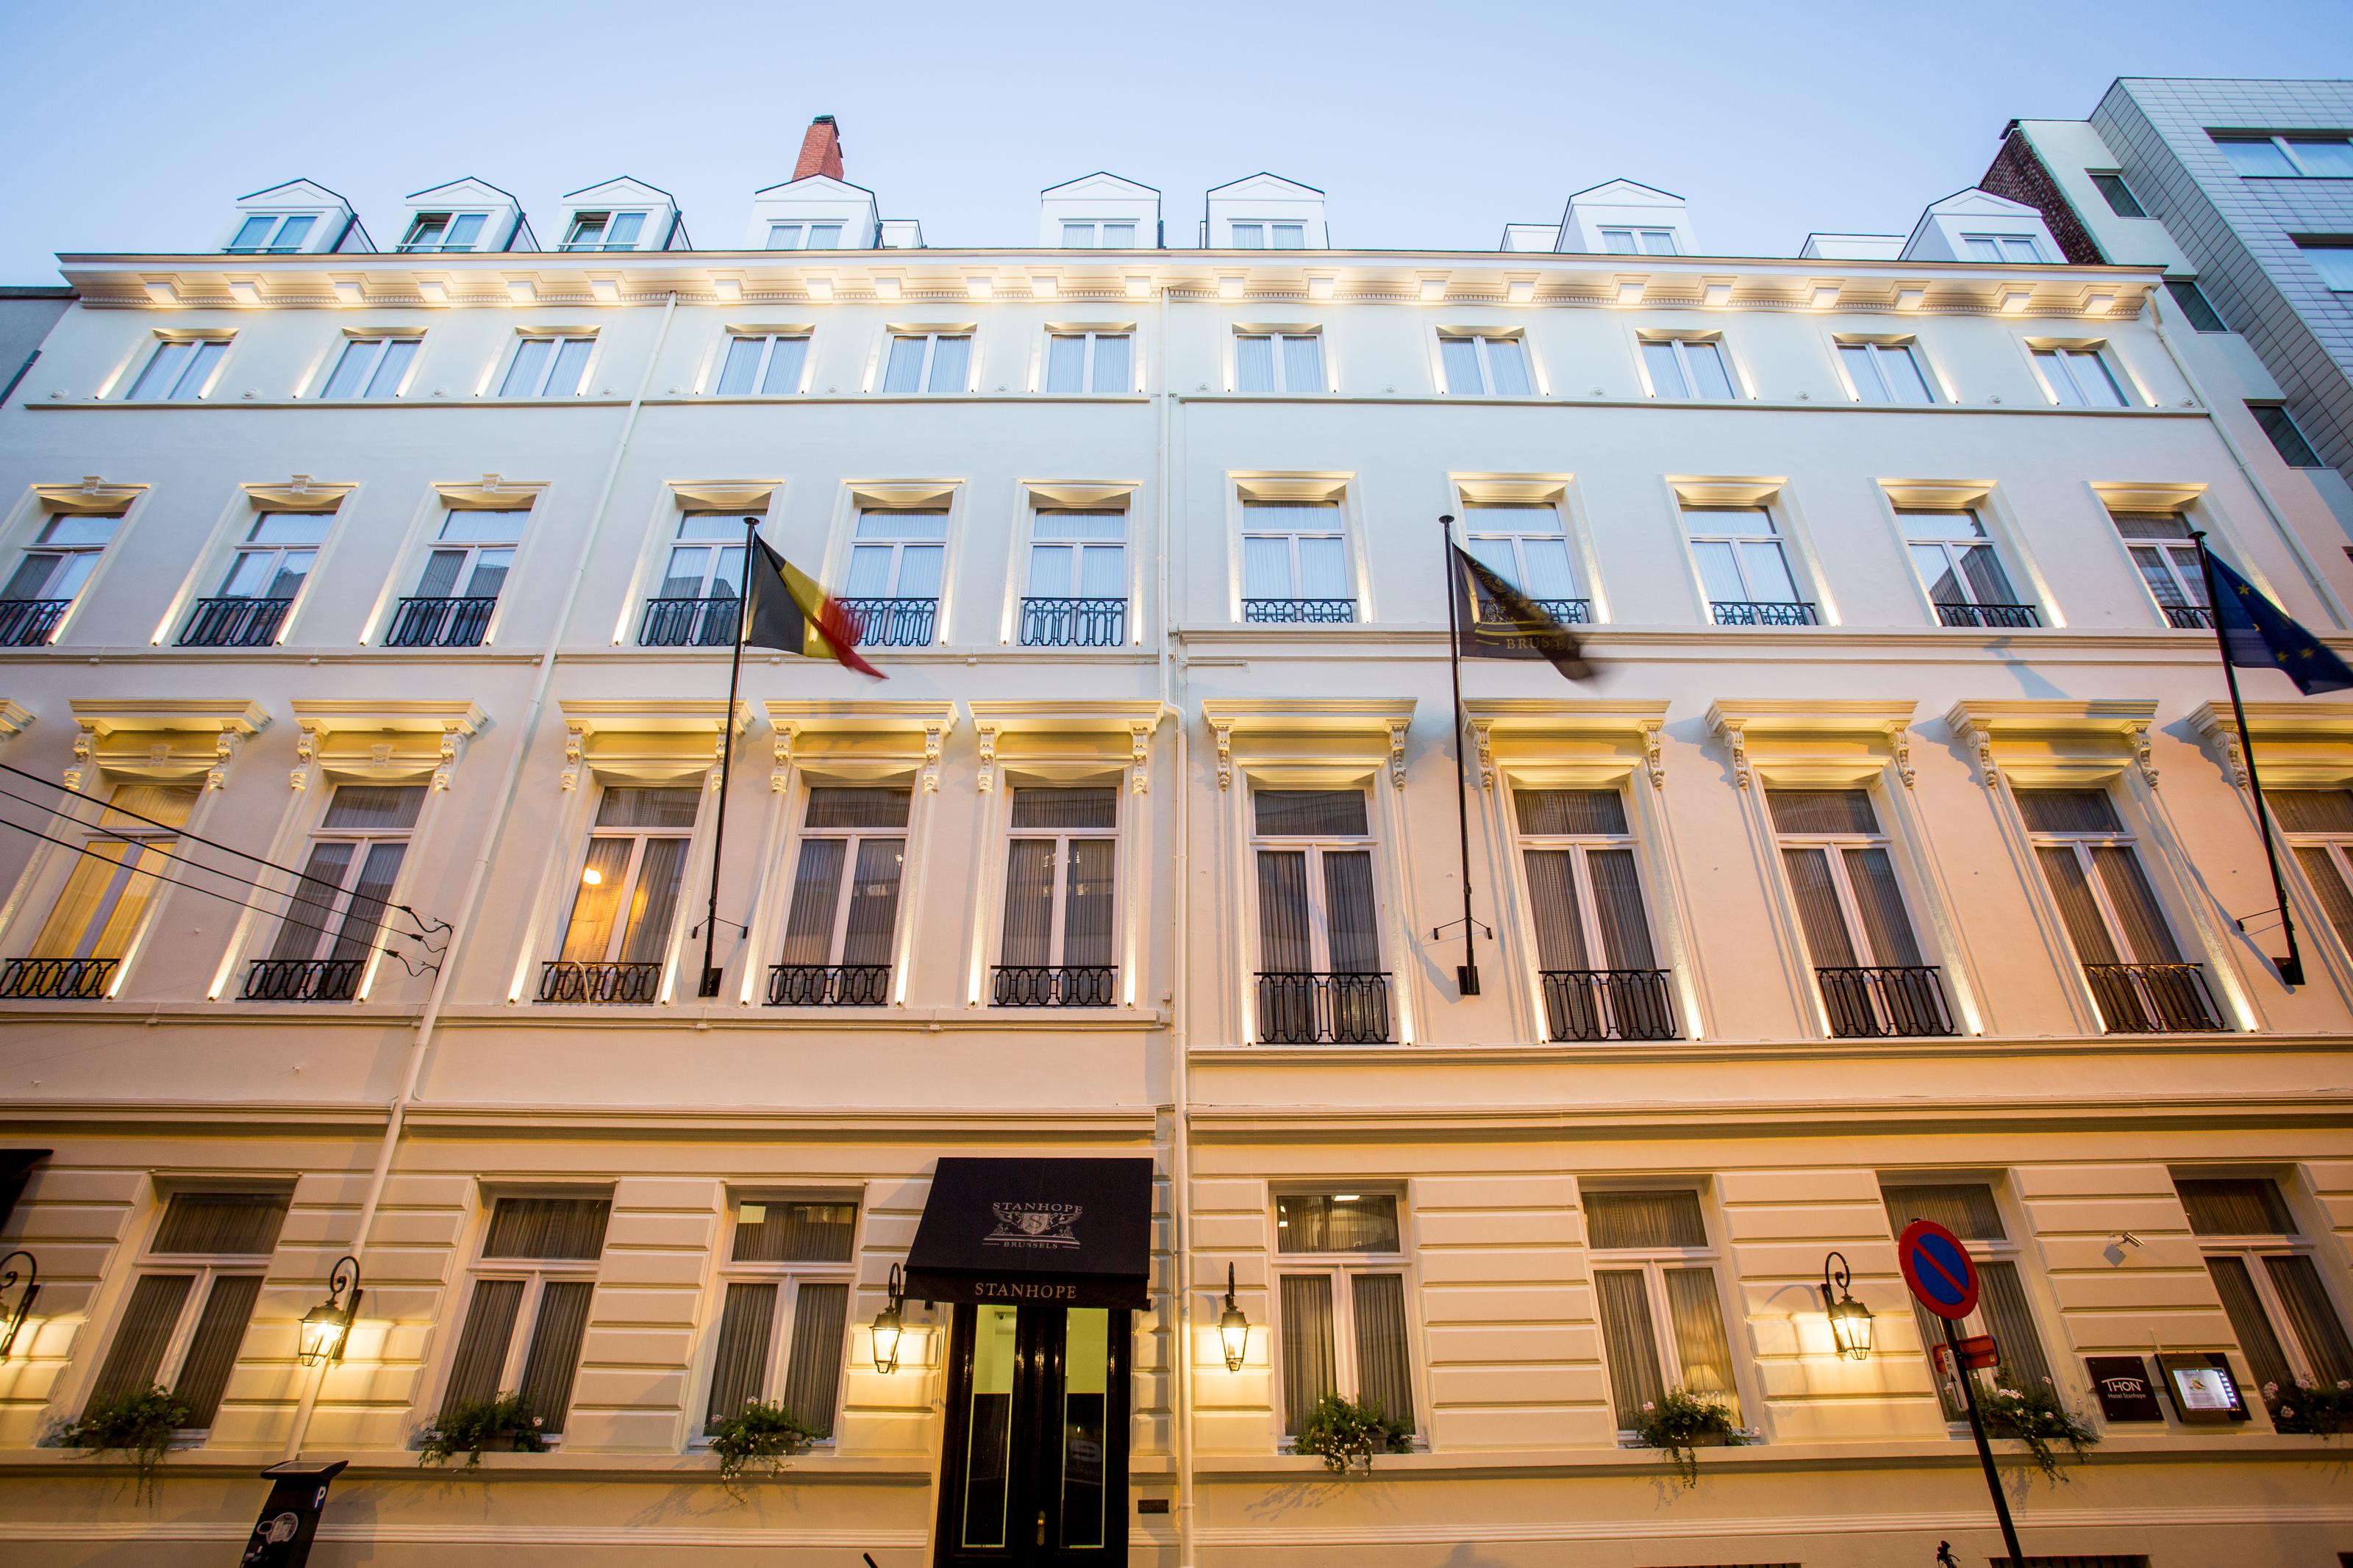 Stanhope Hotel By Thon Hotels Brussels Exterior photo